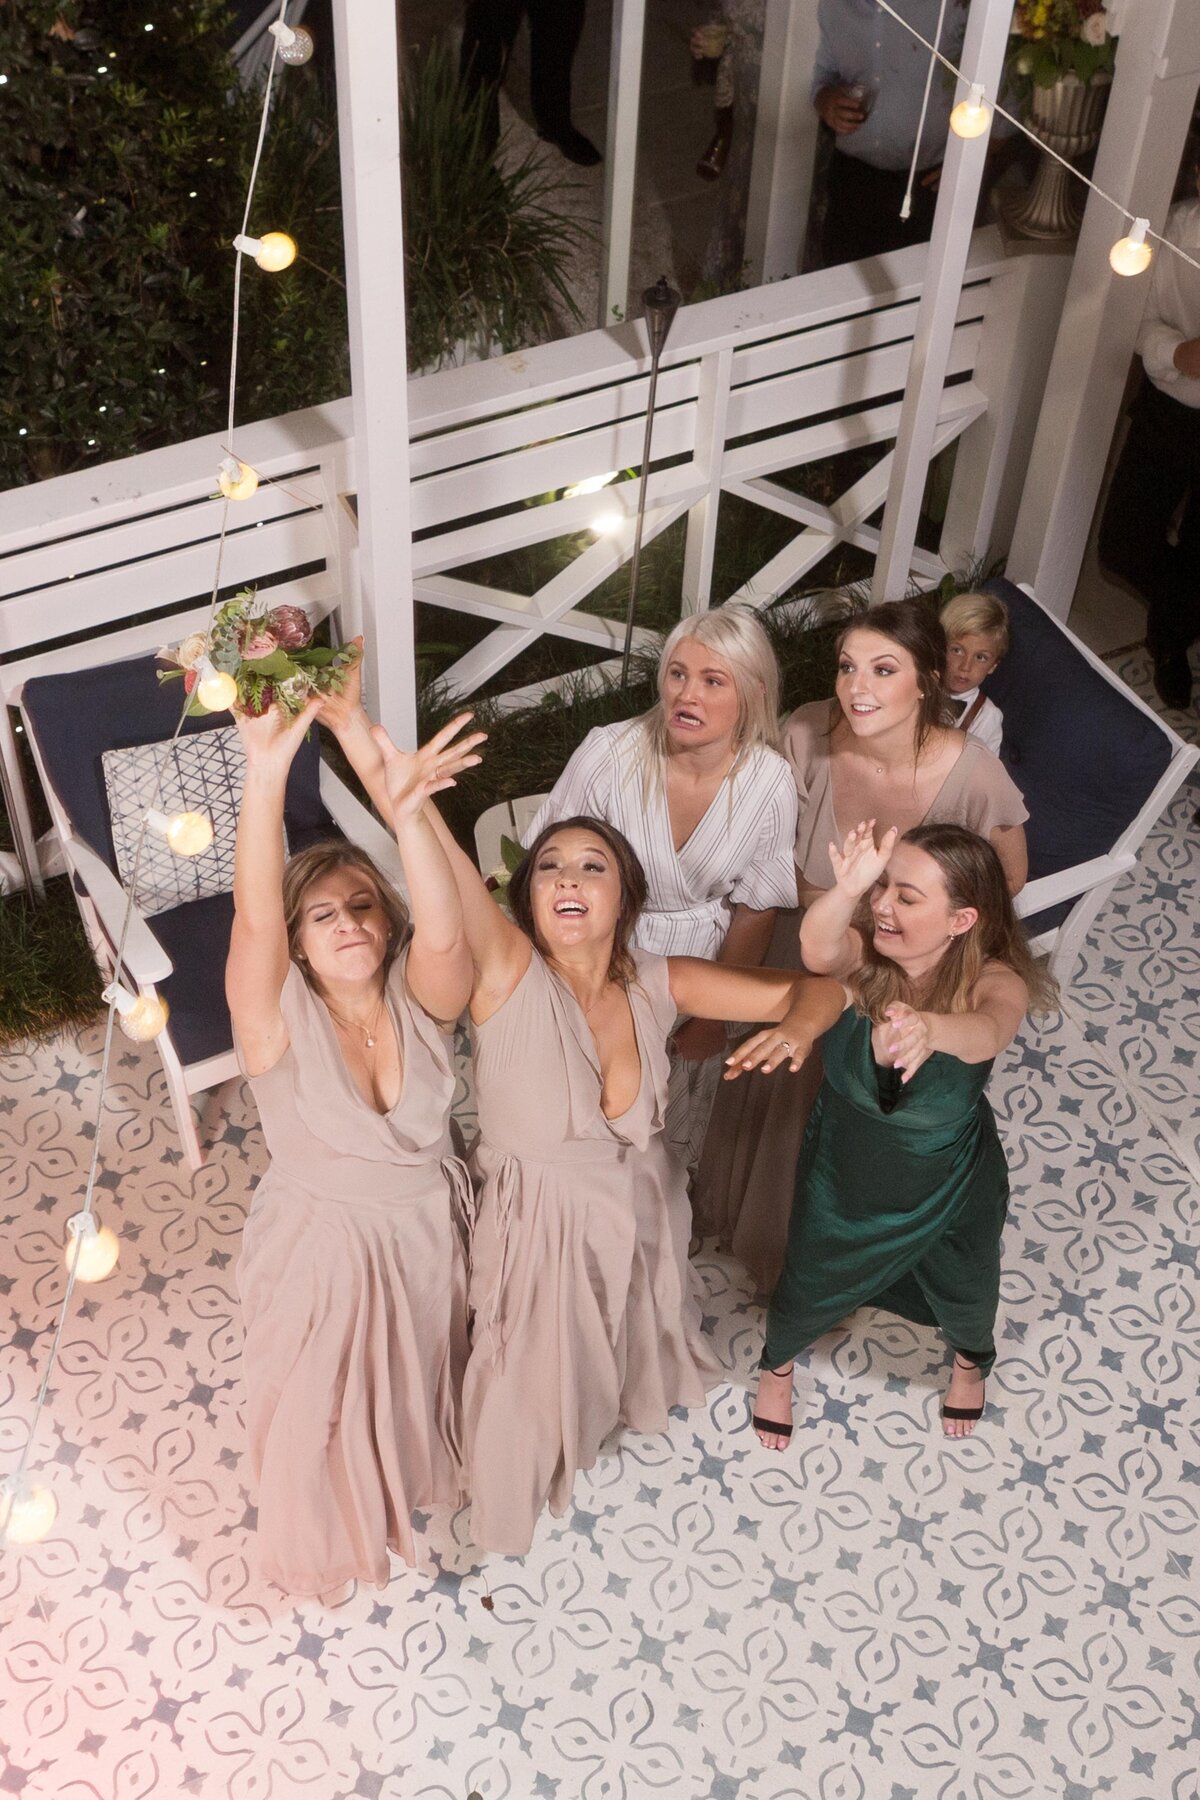 The bridesmaids attempt to catch the bouquet.